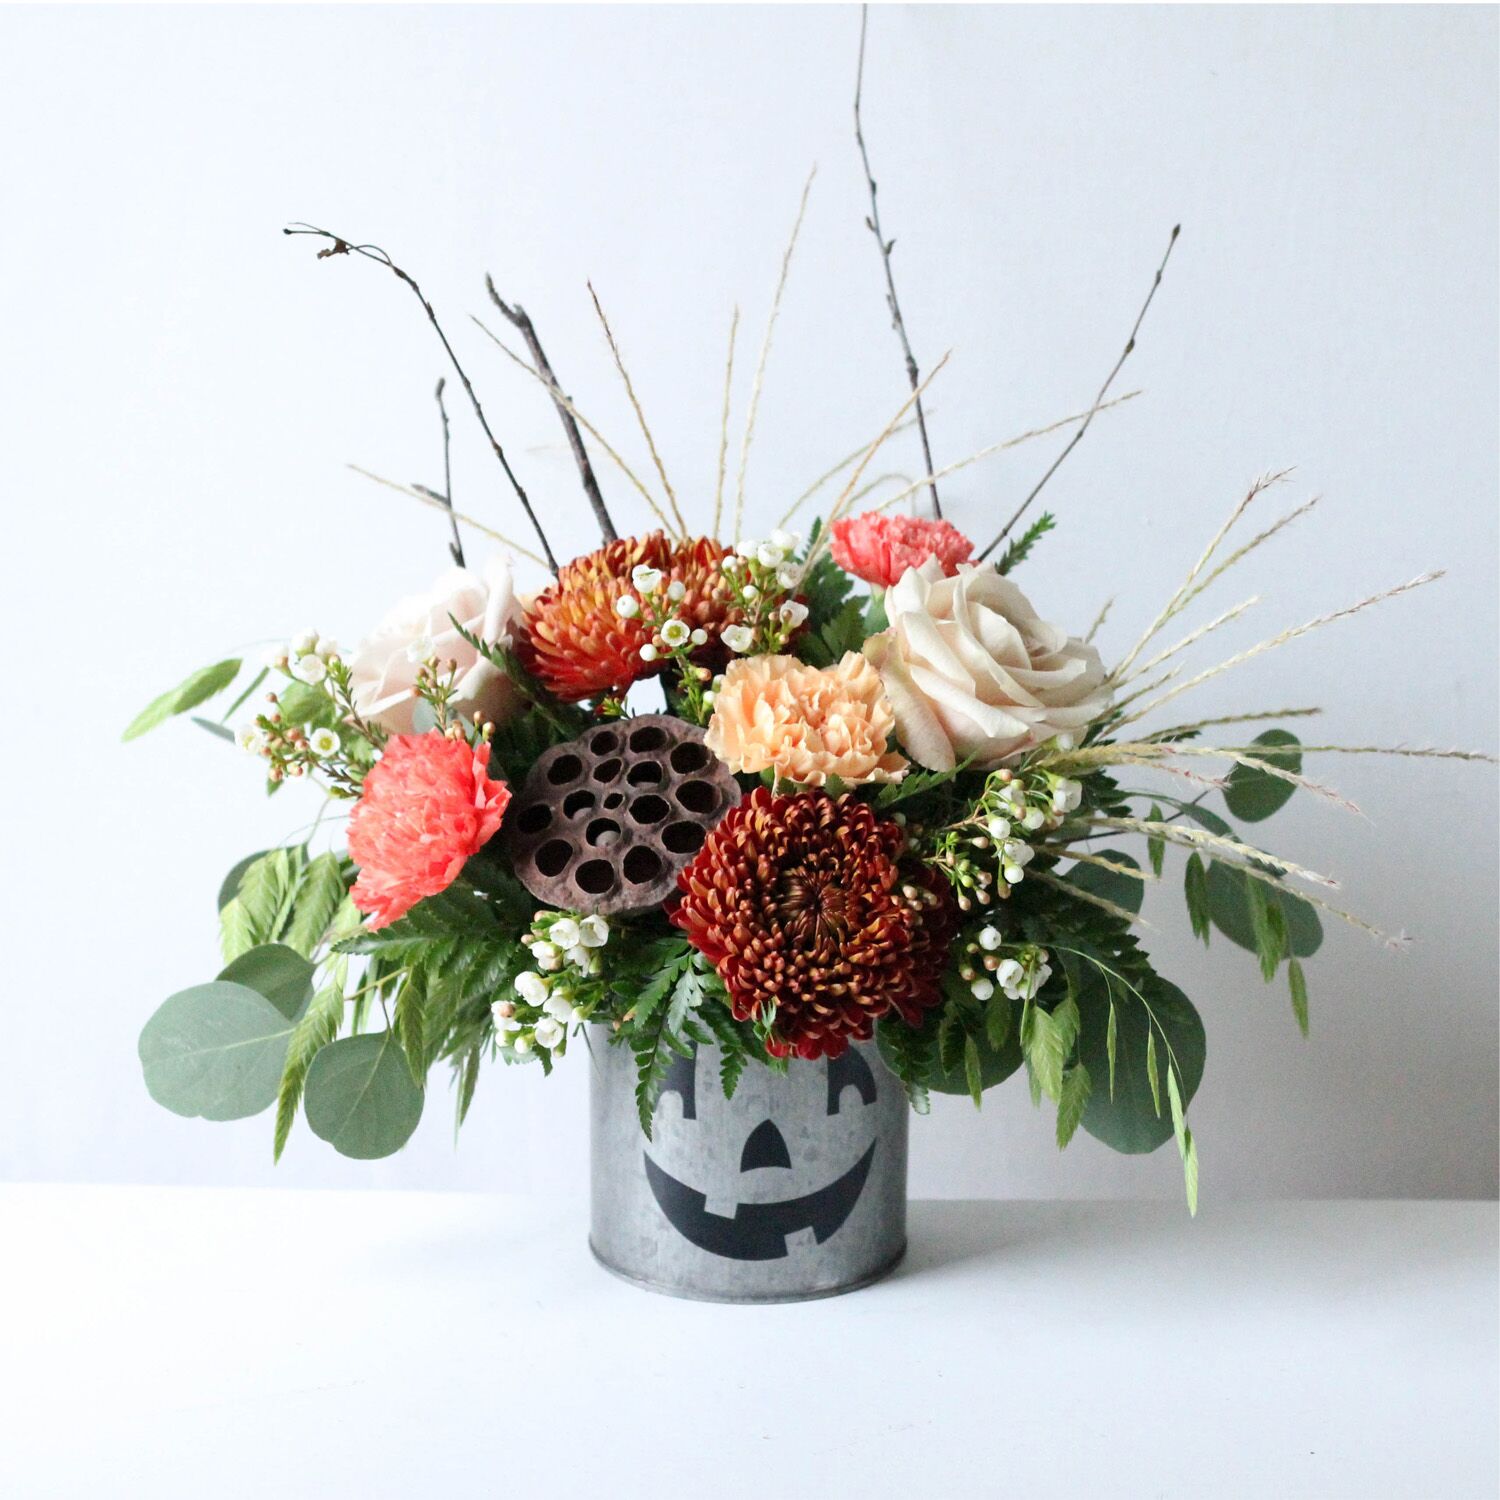 Silver Jack - A flower pot painted to resemble a Jack-O-Lantern with a flower arrangement